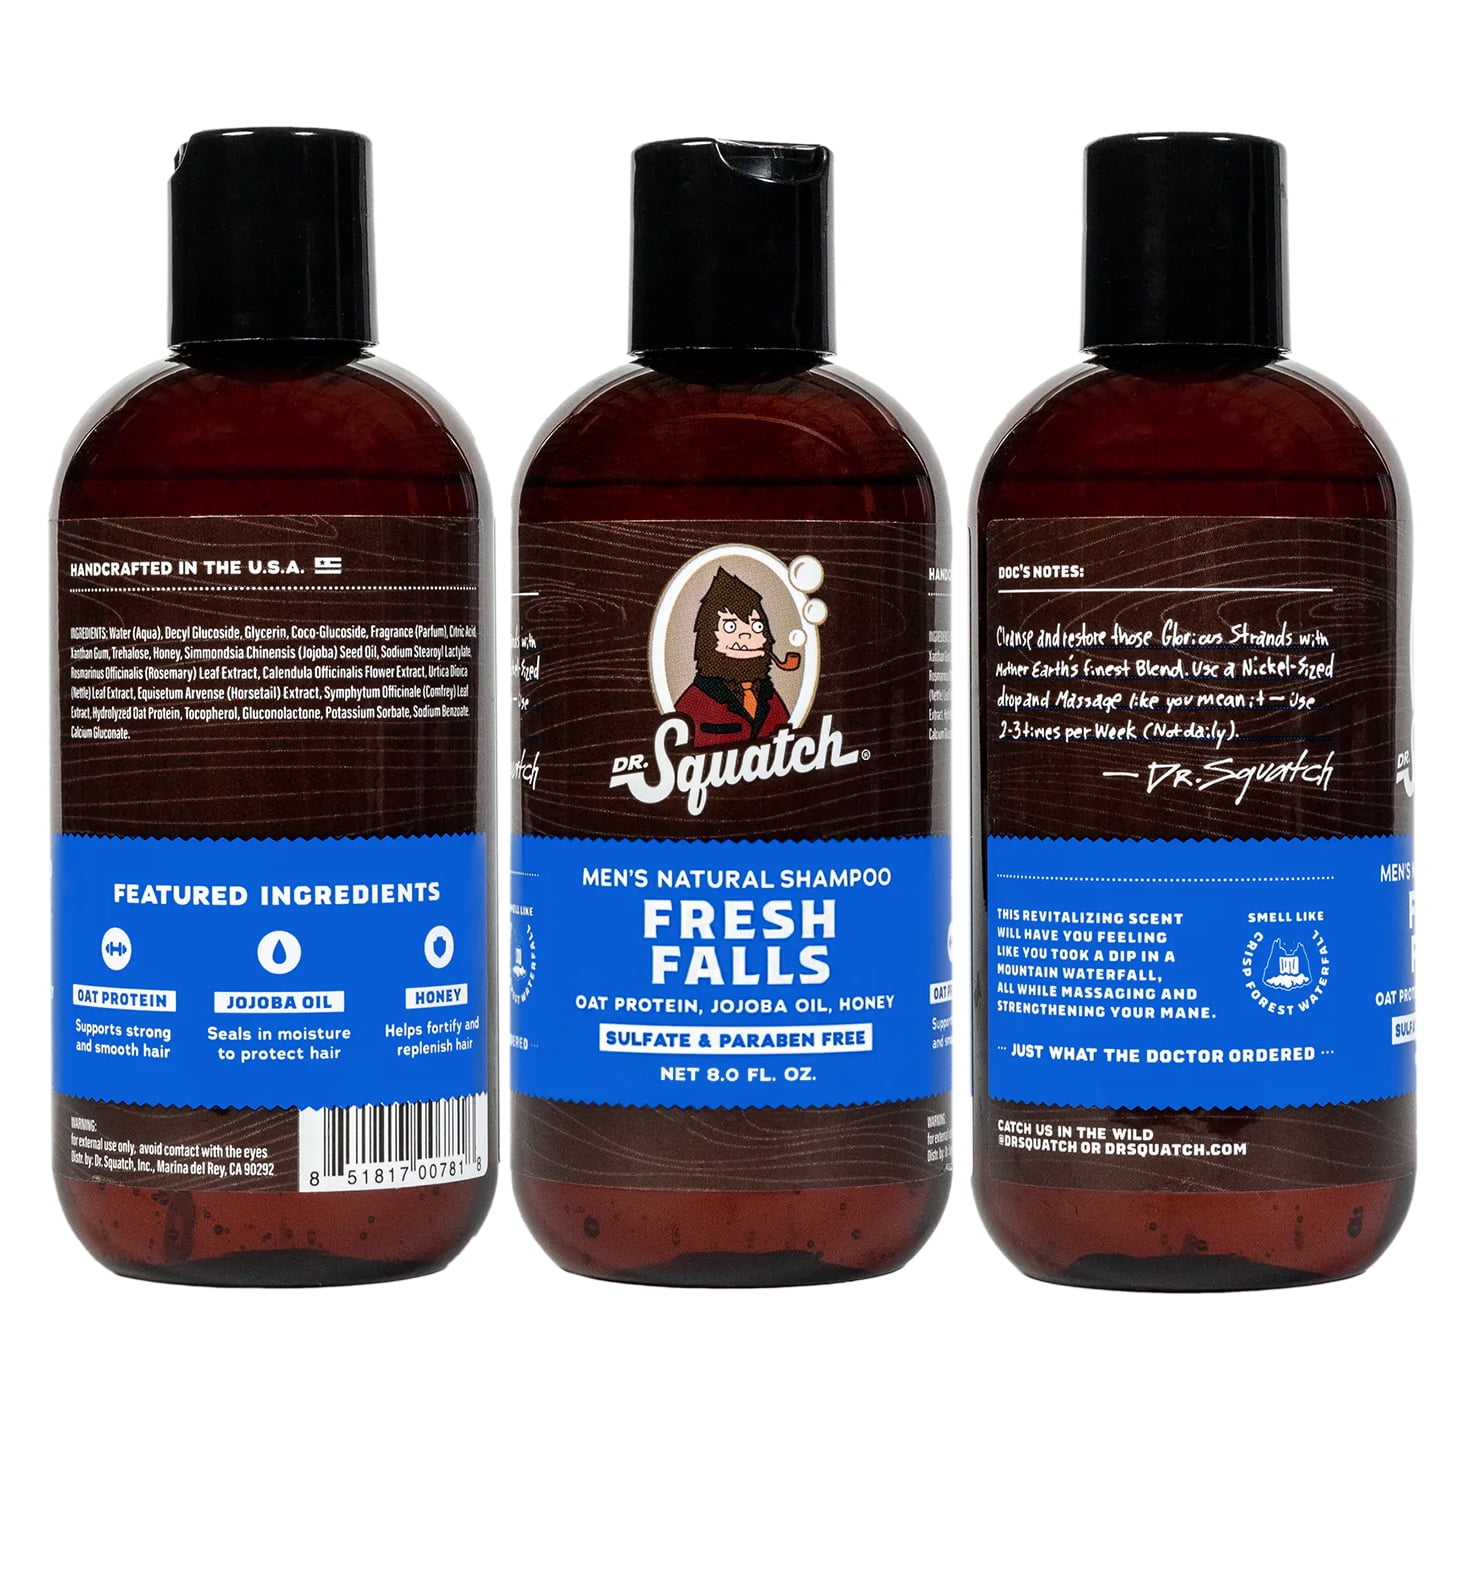 DR SQUATCH SHAMPOO & CONDITIONER REVIEW! ARE THEY WORTH THE 40